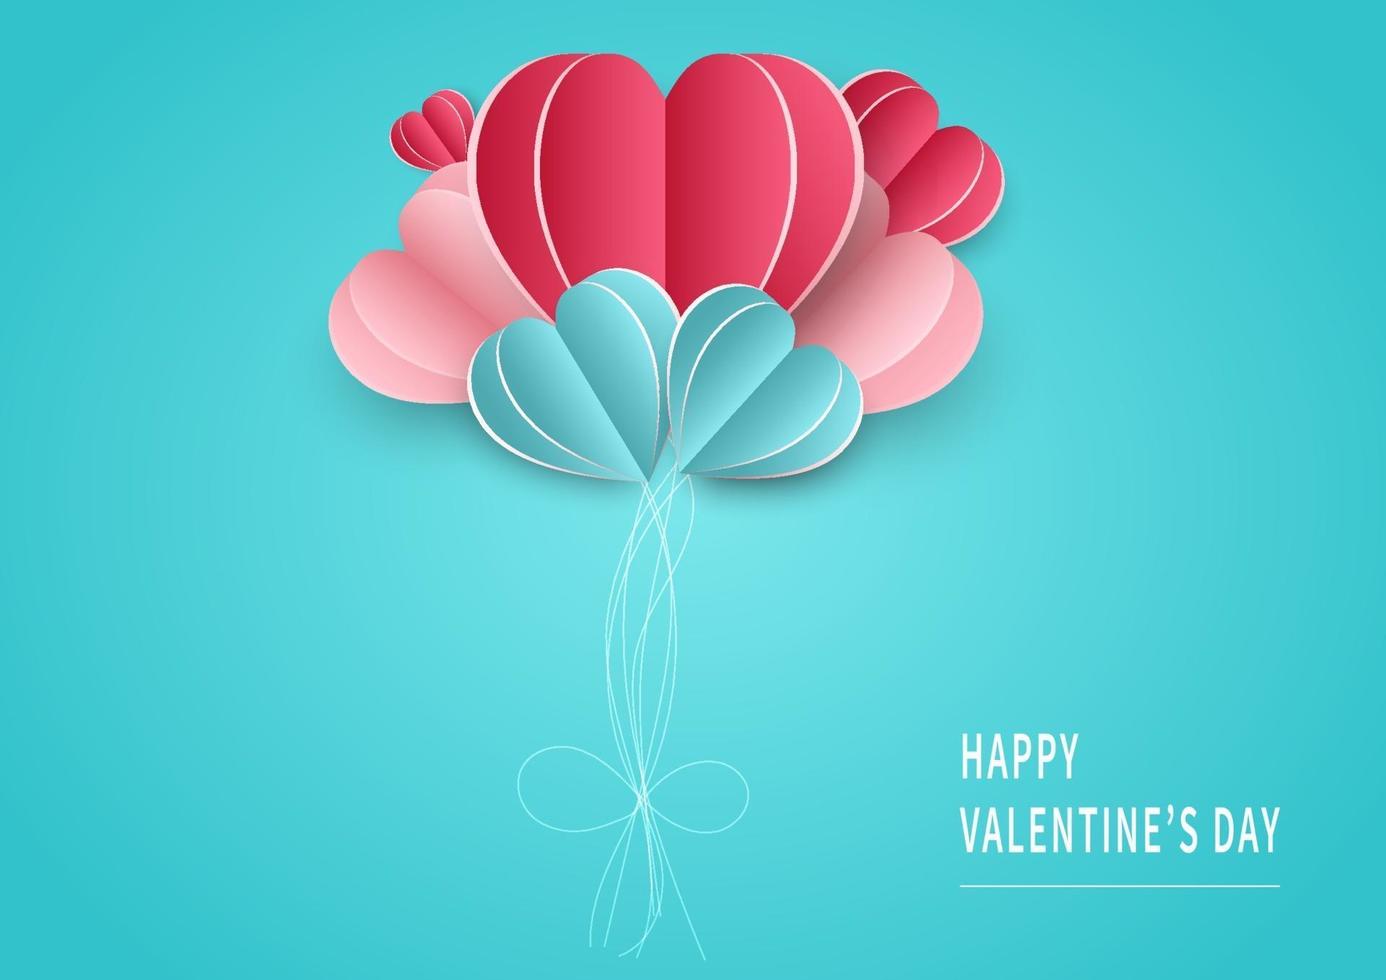 Valentine's day background. Abstract background. Balloons hearts pink and blue paper cut card on light blue backgroungd. Design for valentine's day festival